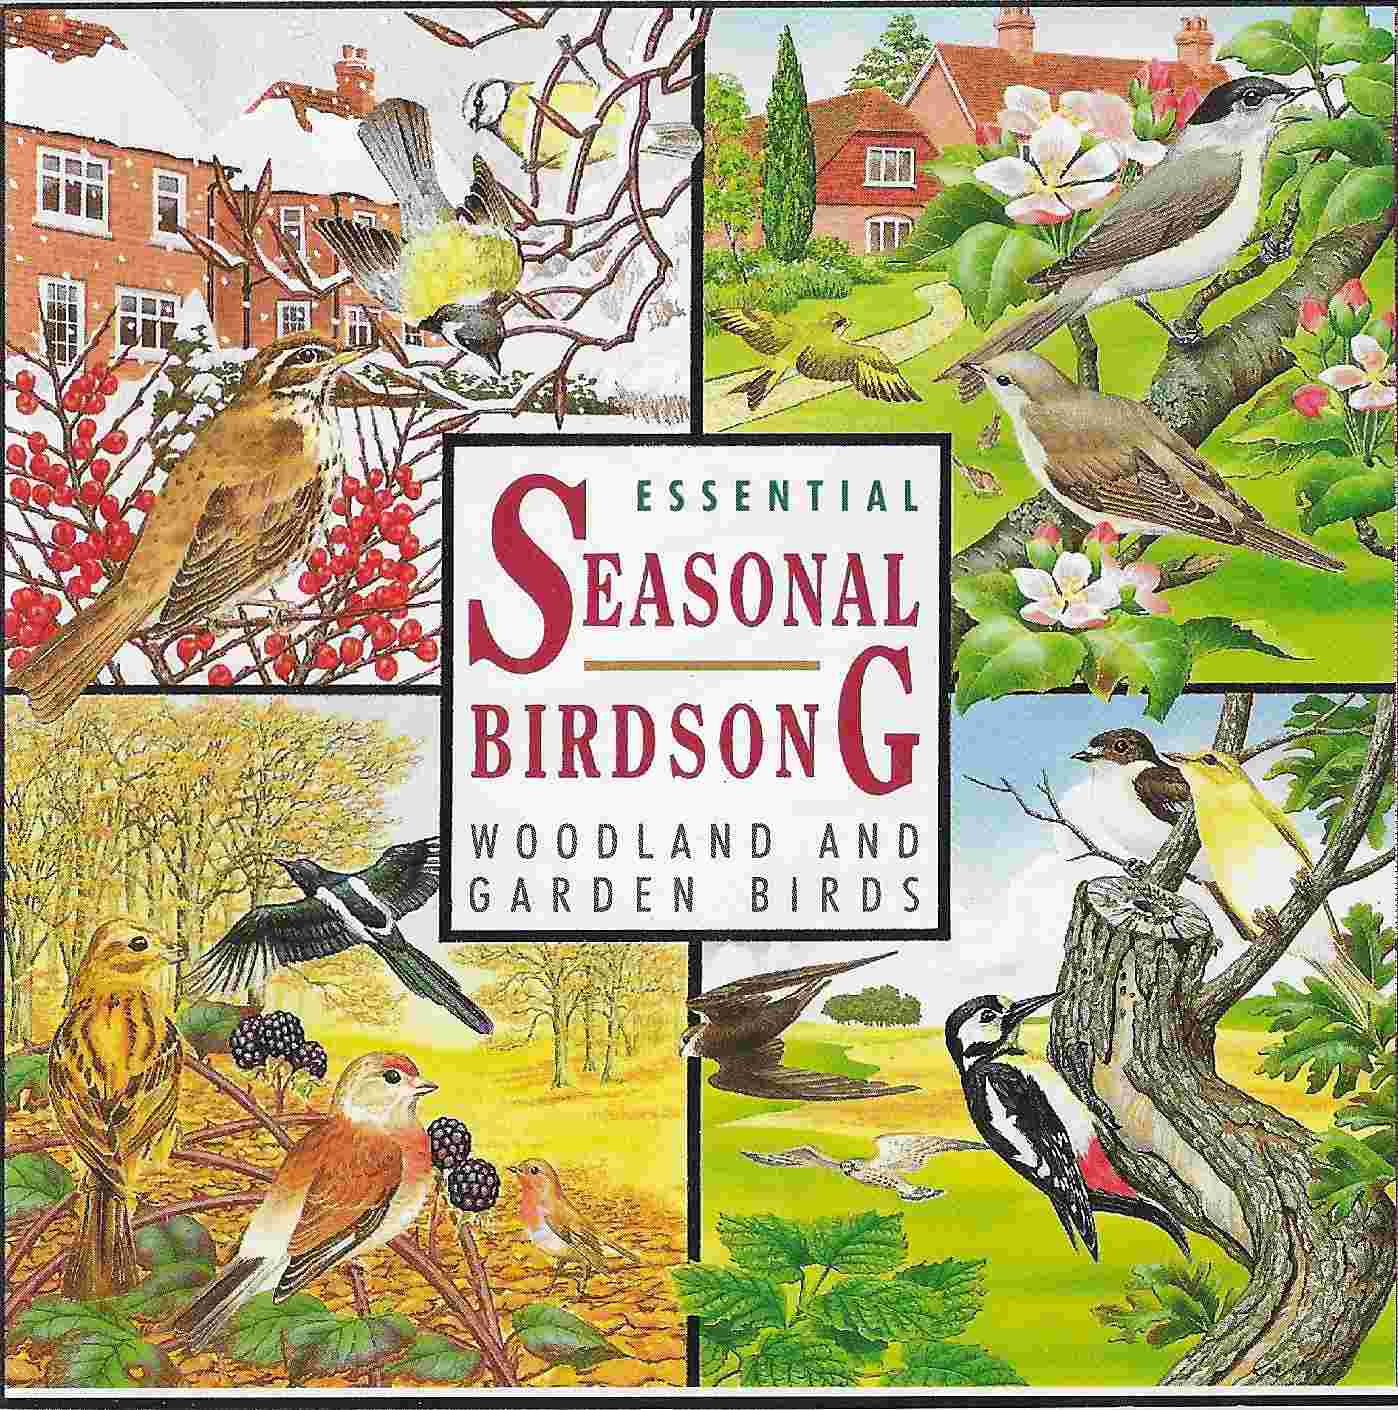 Picture of BBCCD846 Essential seasonal birdsong sound effects by artist Various from the BBC cds - Records and Tapes library